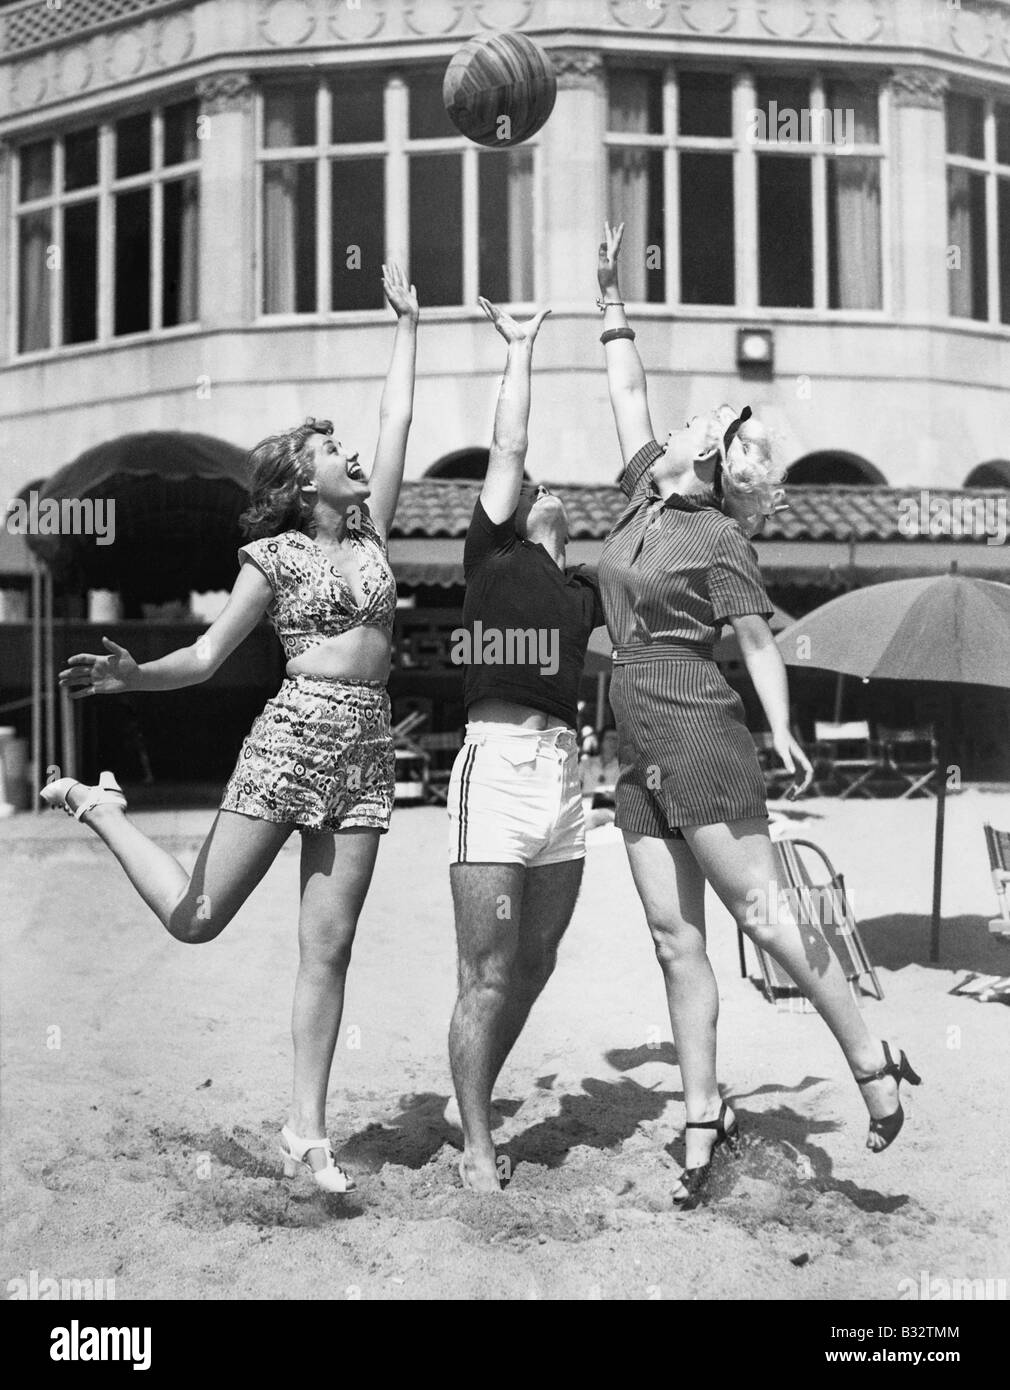 Three young women playing with a ball on the beach Stock Photo